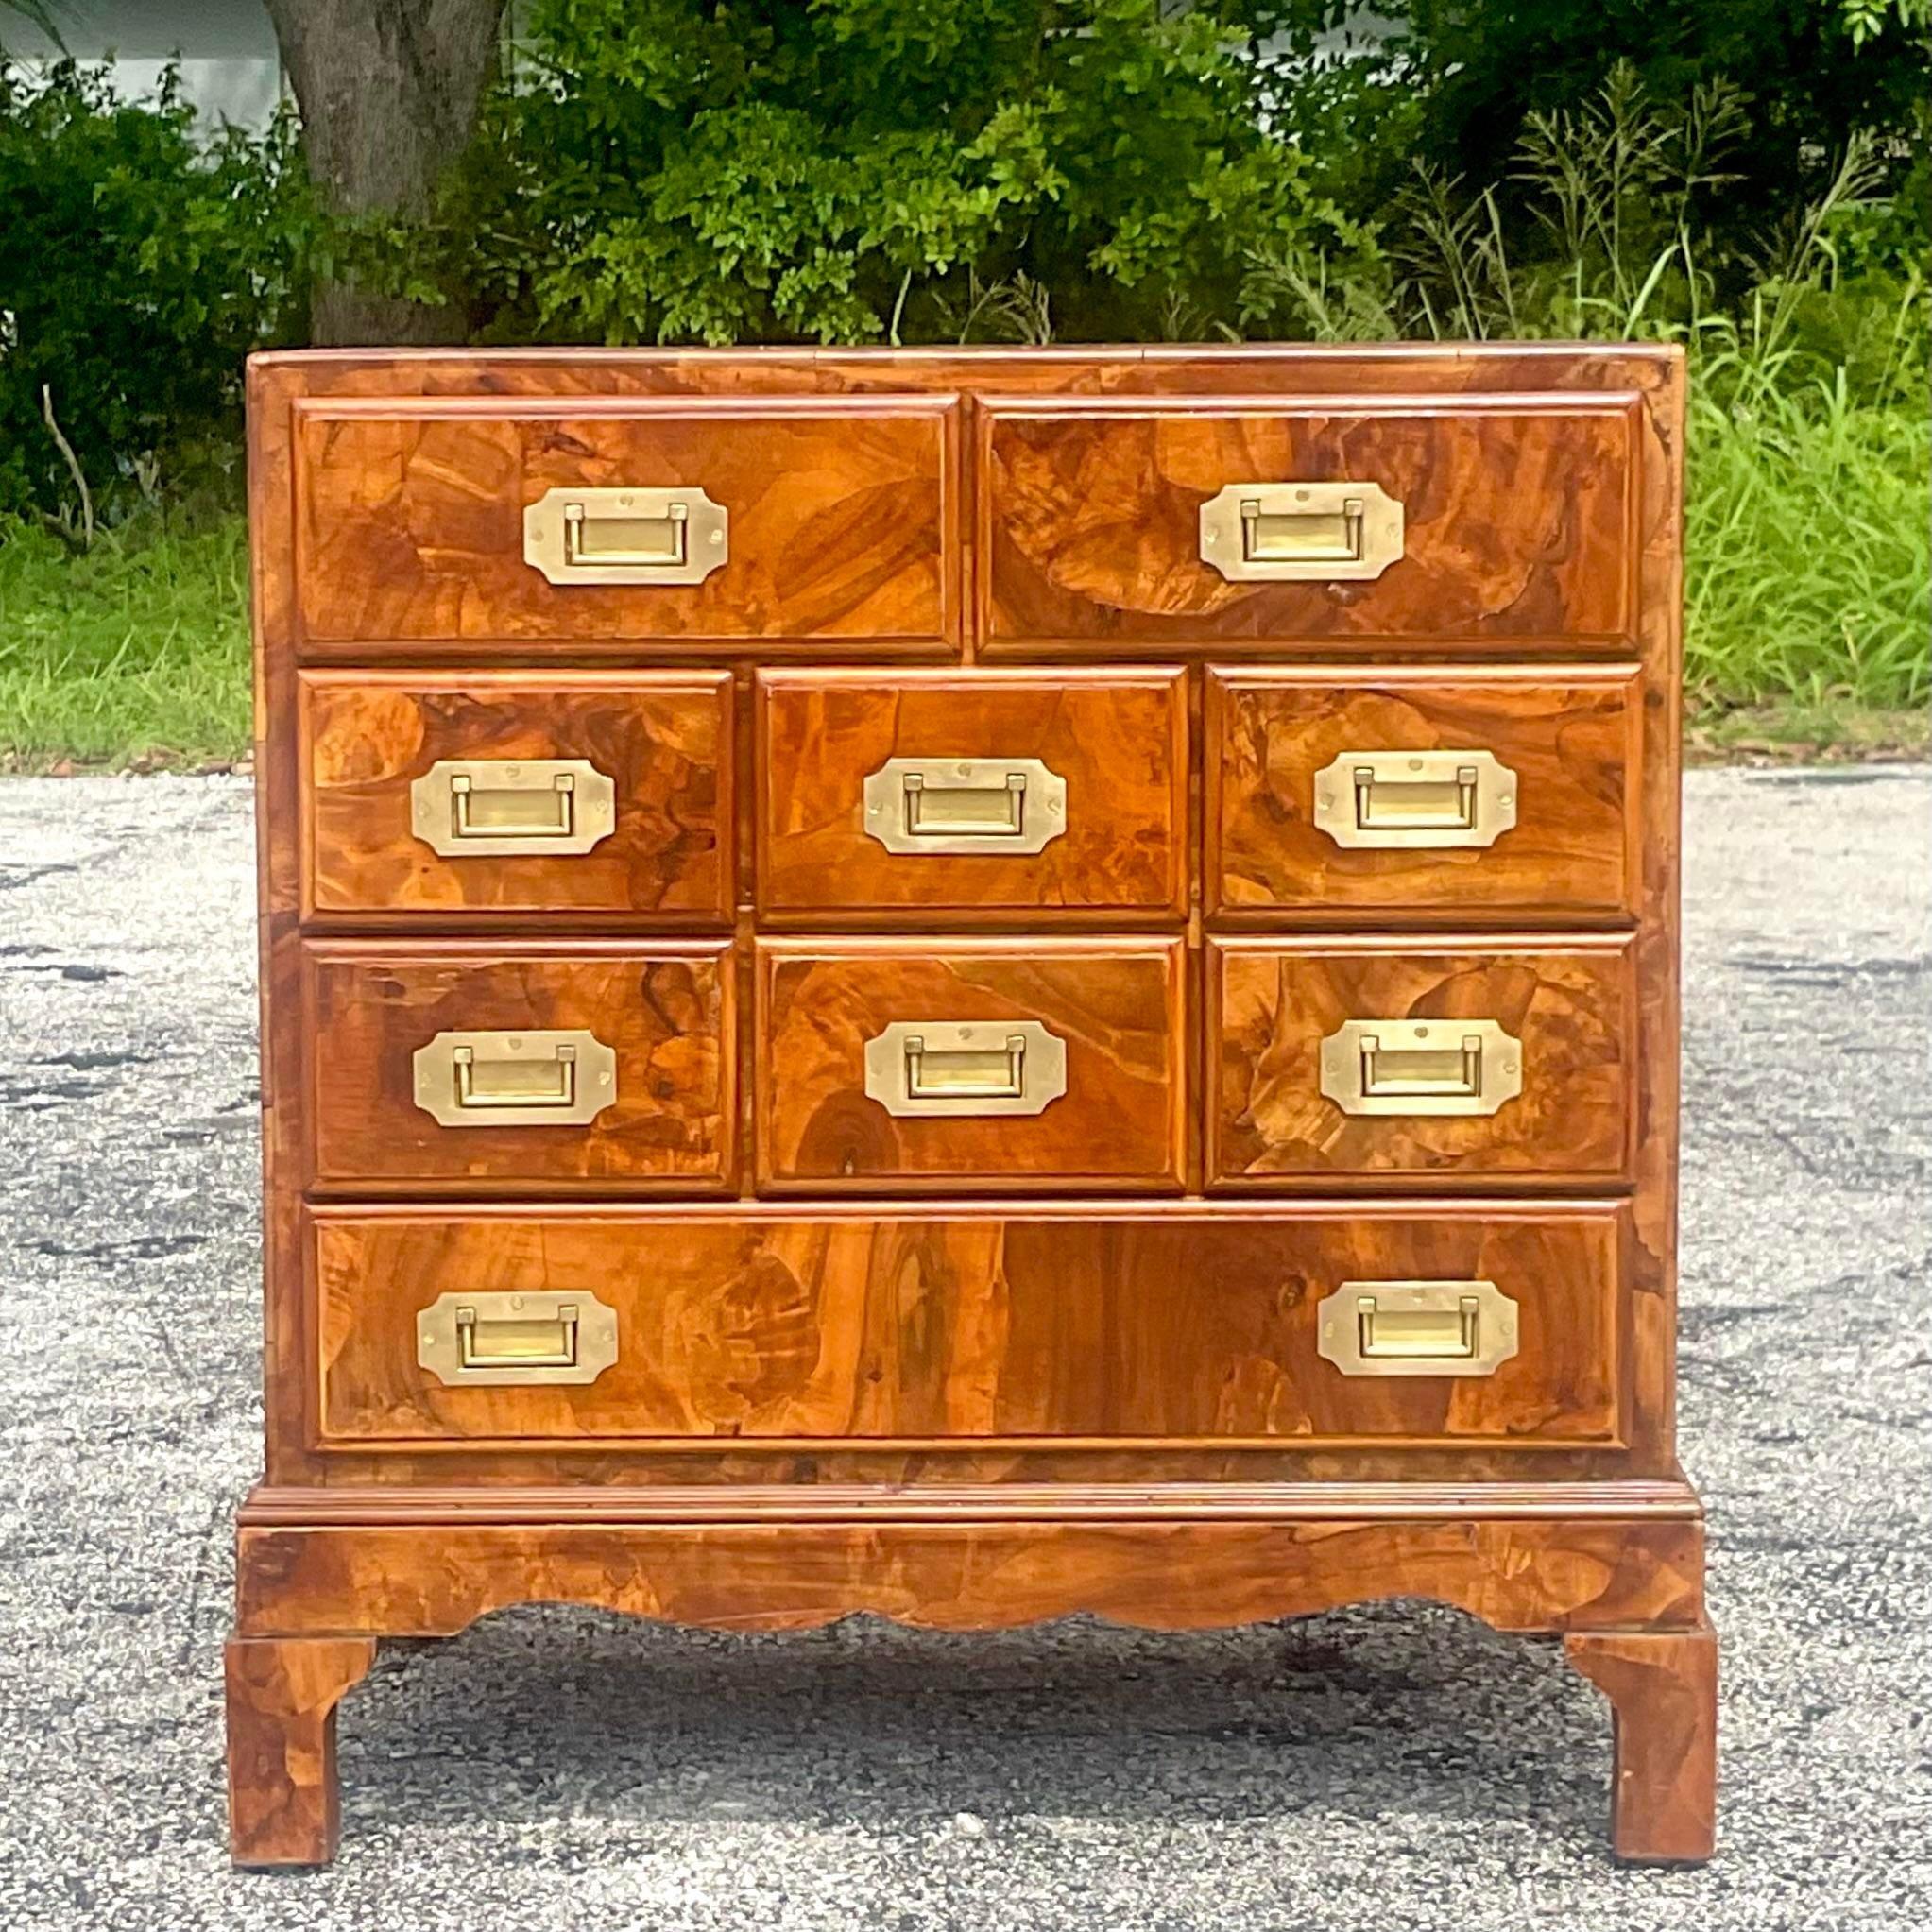 A fabulous vintage Regency petite chest of drawers. A chic patchwork Olive Burl wood with all four sides finished. Sits easily in the middle of the room. Made in Italy. Acquired from a Palm Beach estate. 